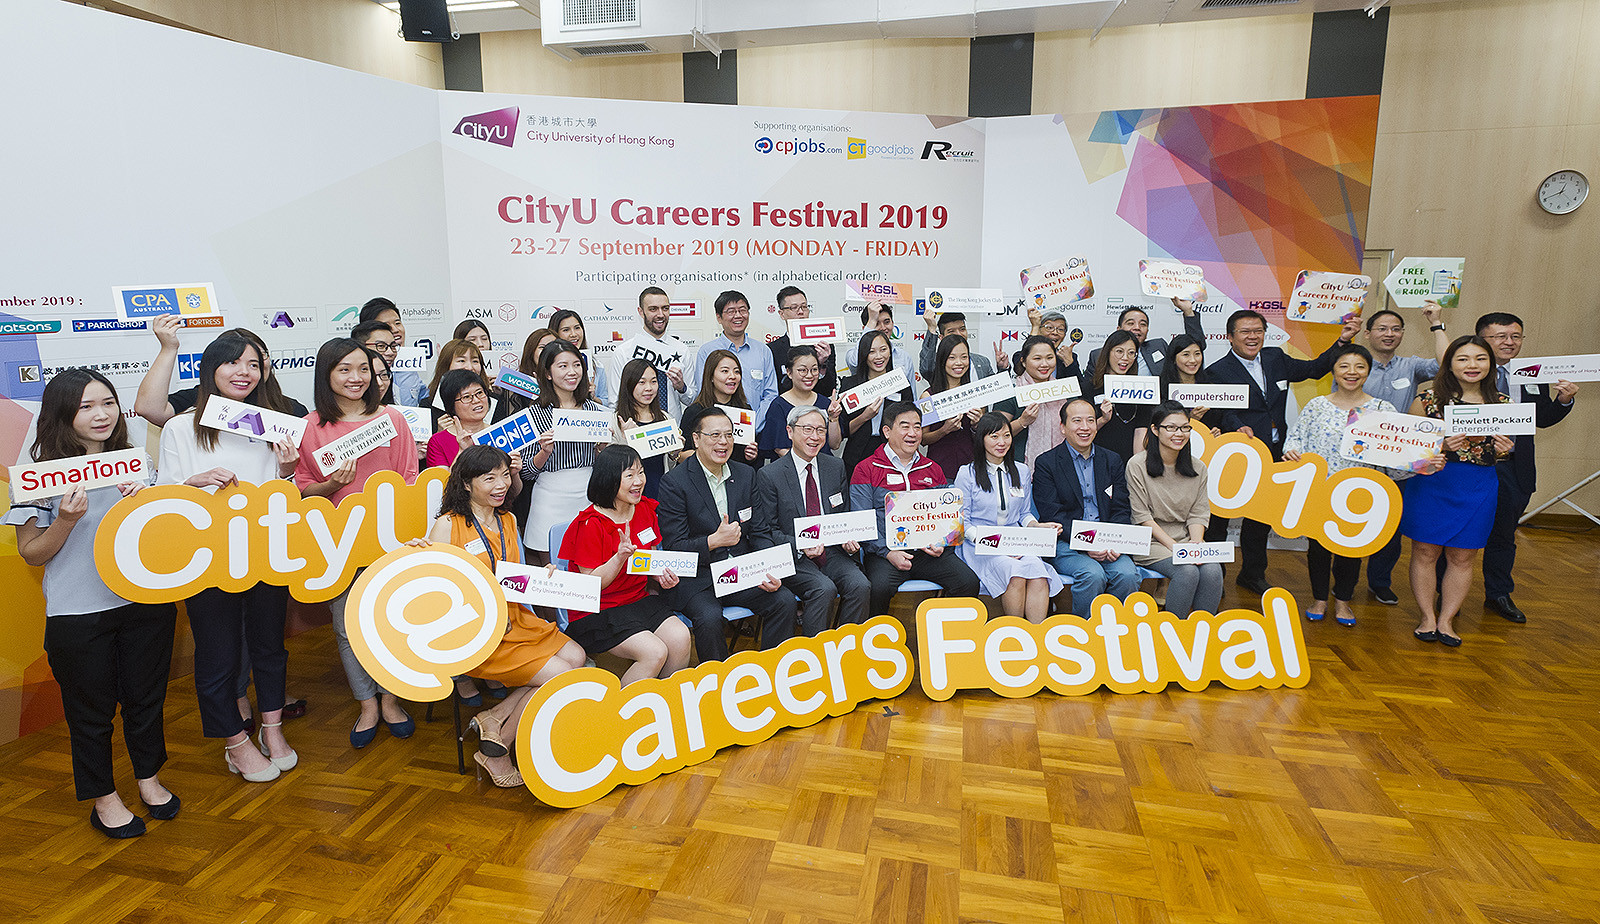 The participating employers have provided CityU students with hundreds of graduate and internship positions. 